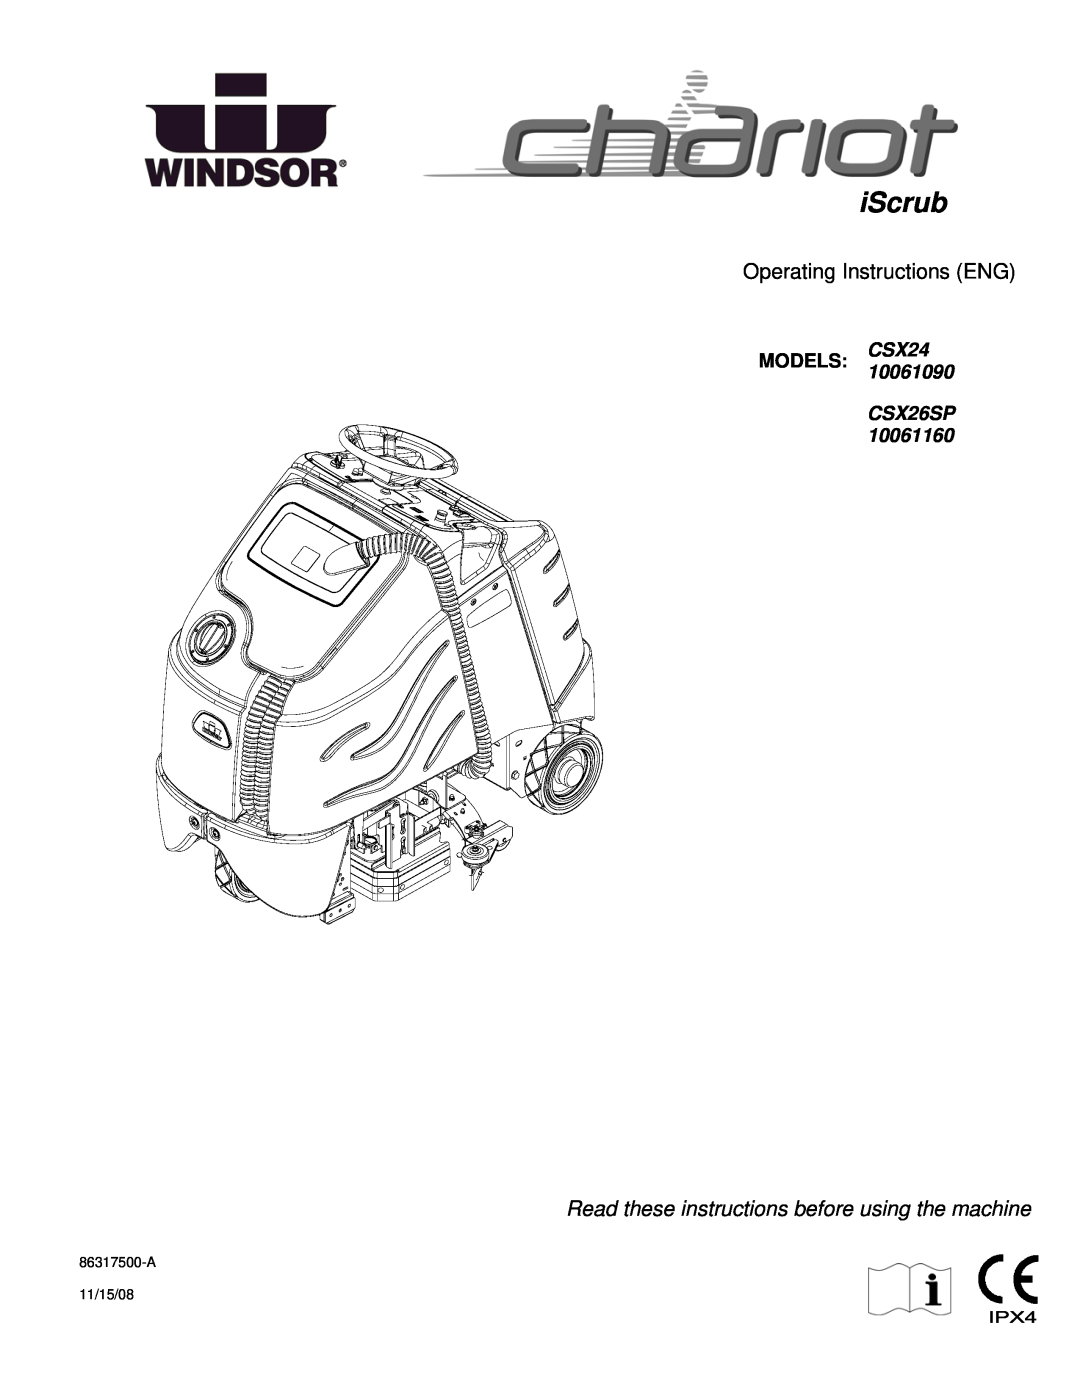 Windsor manual Operating Instructions ENG, Read these instructions before using the machine, MODELS: CSX2410061090 